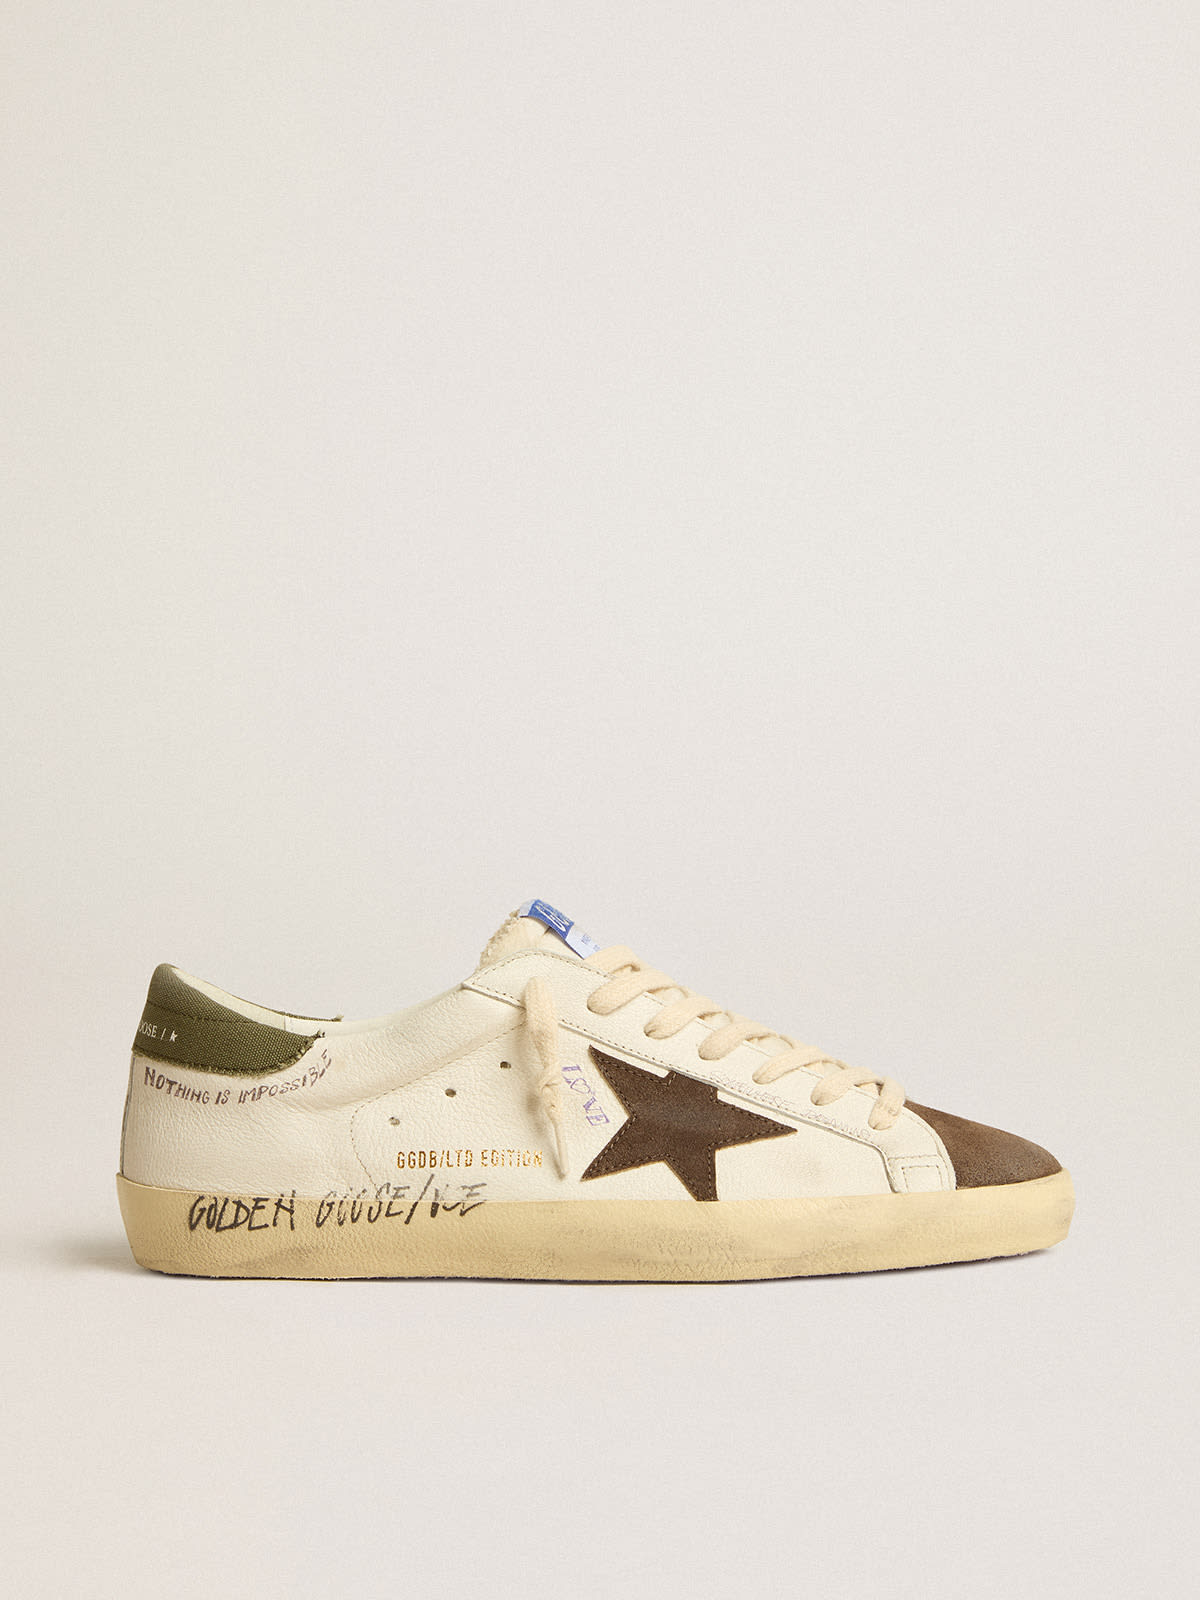 Golden Goose - Men's Super-Star LTD in nappa with brown suede star and green heel tab in 